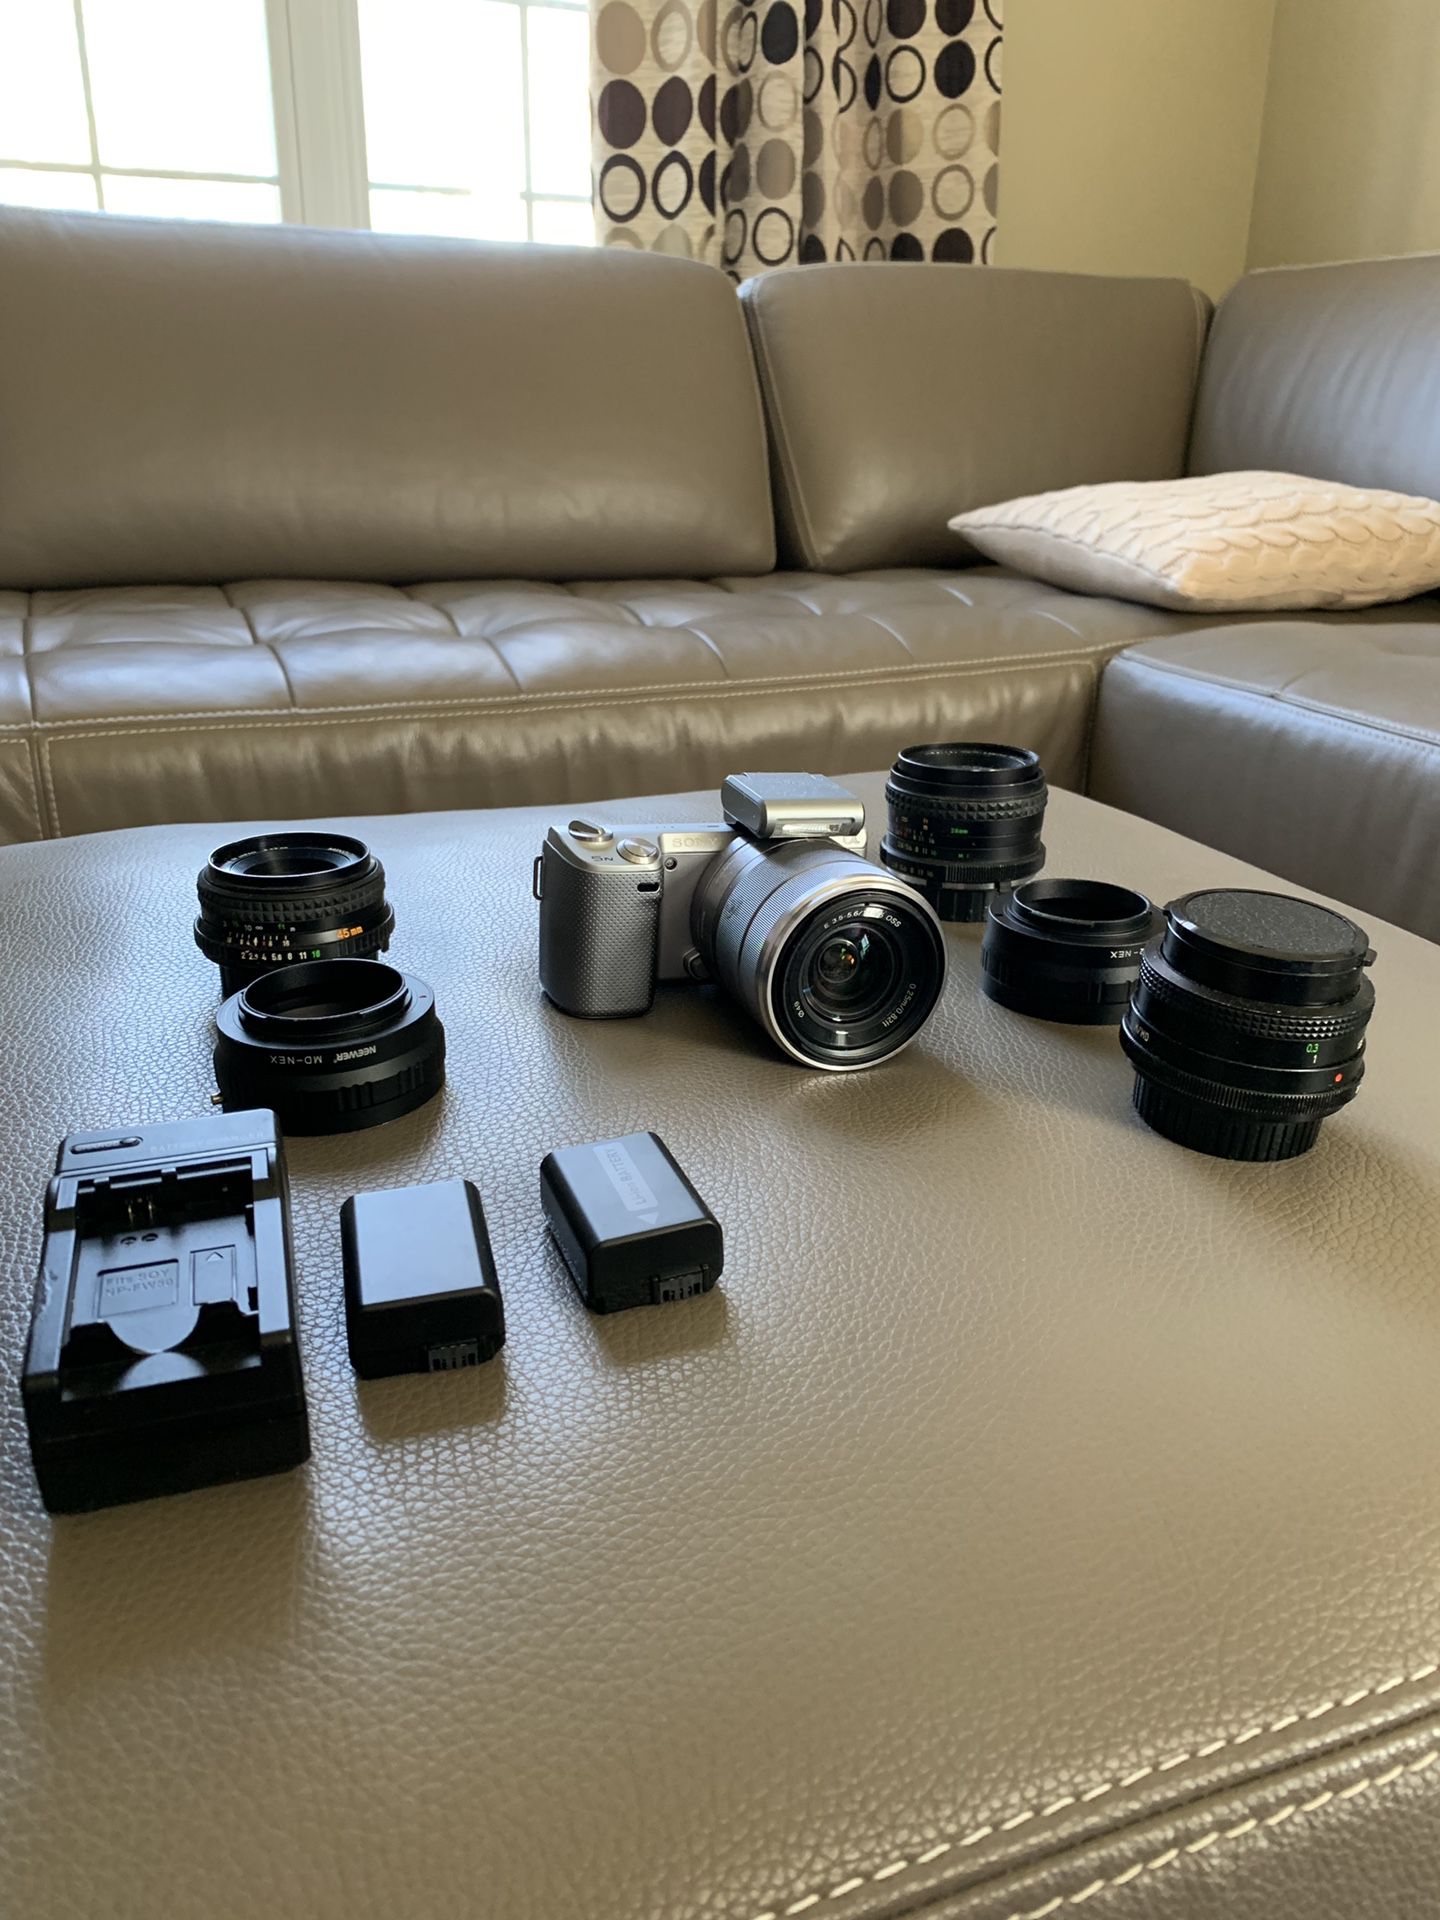 HUGE Sony 5N Mirrorless Camera Collection w/ Lens, Battery, Adapter, Charger and More